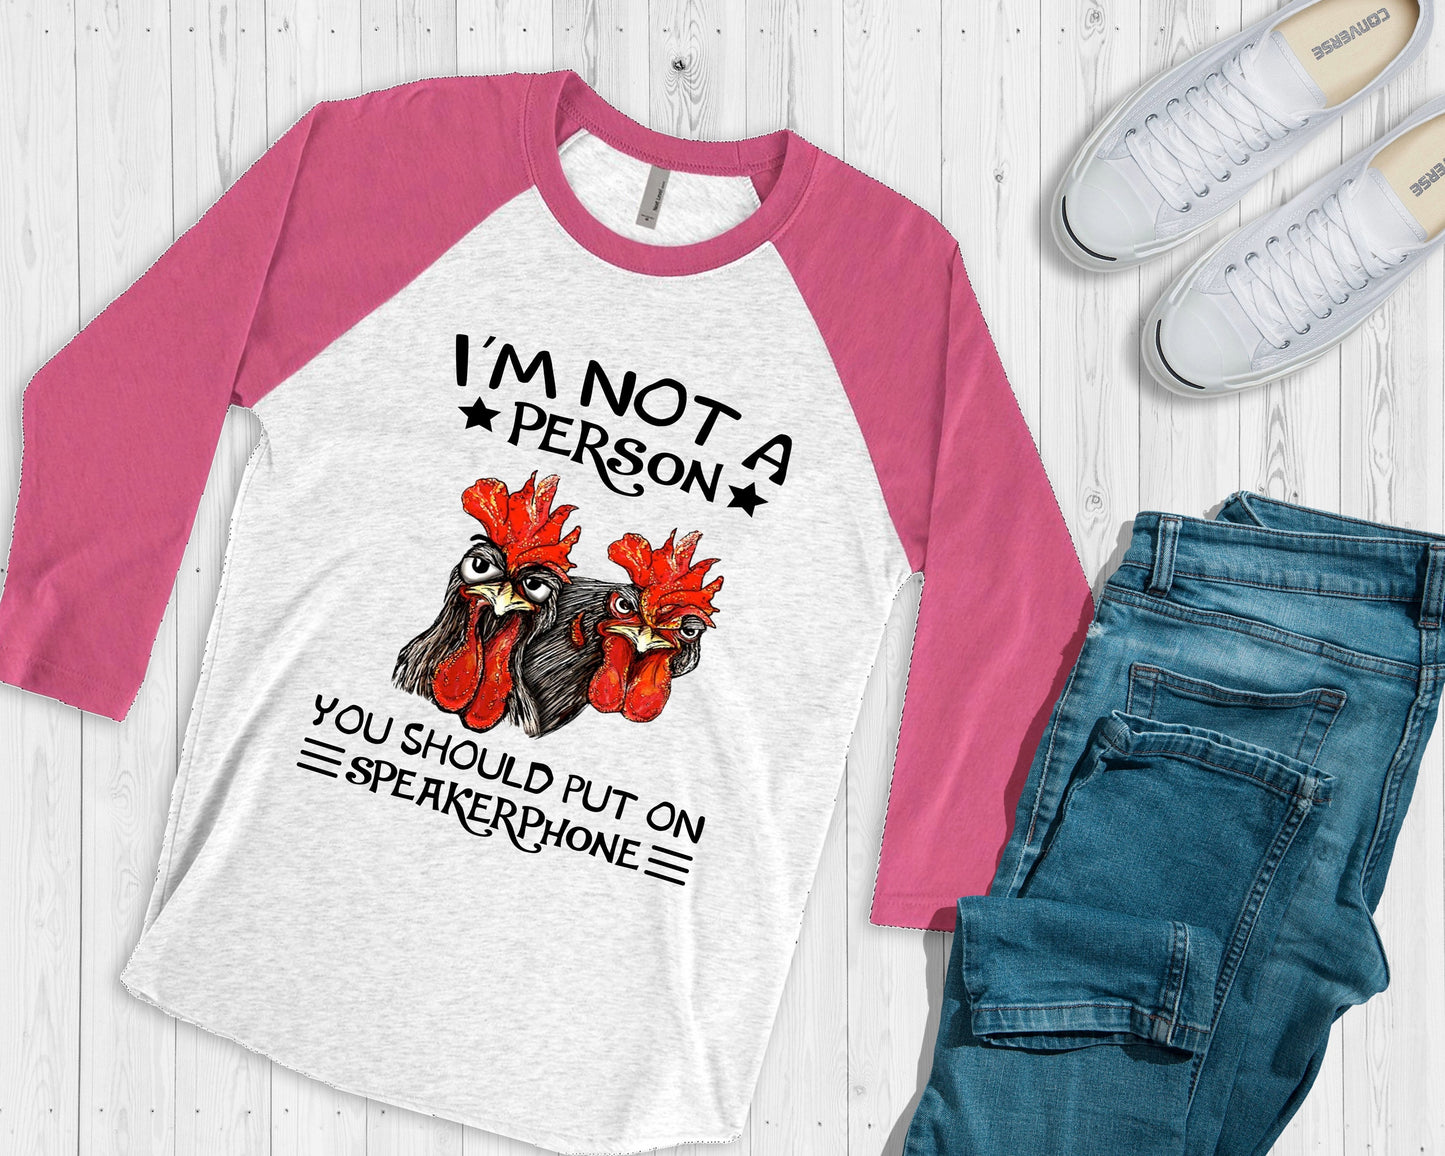 Chicken Rooster I Am Not A Person You Should Put On Speakerphone design raglan.